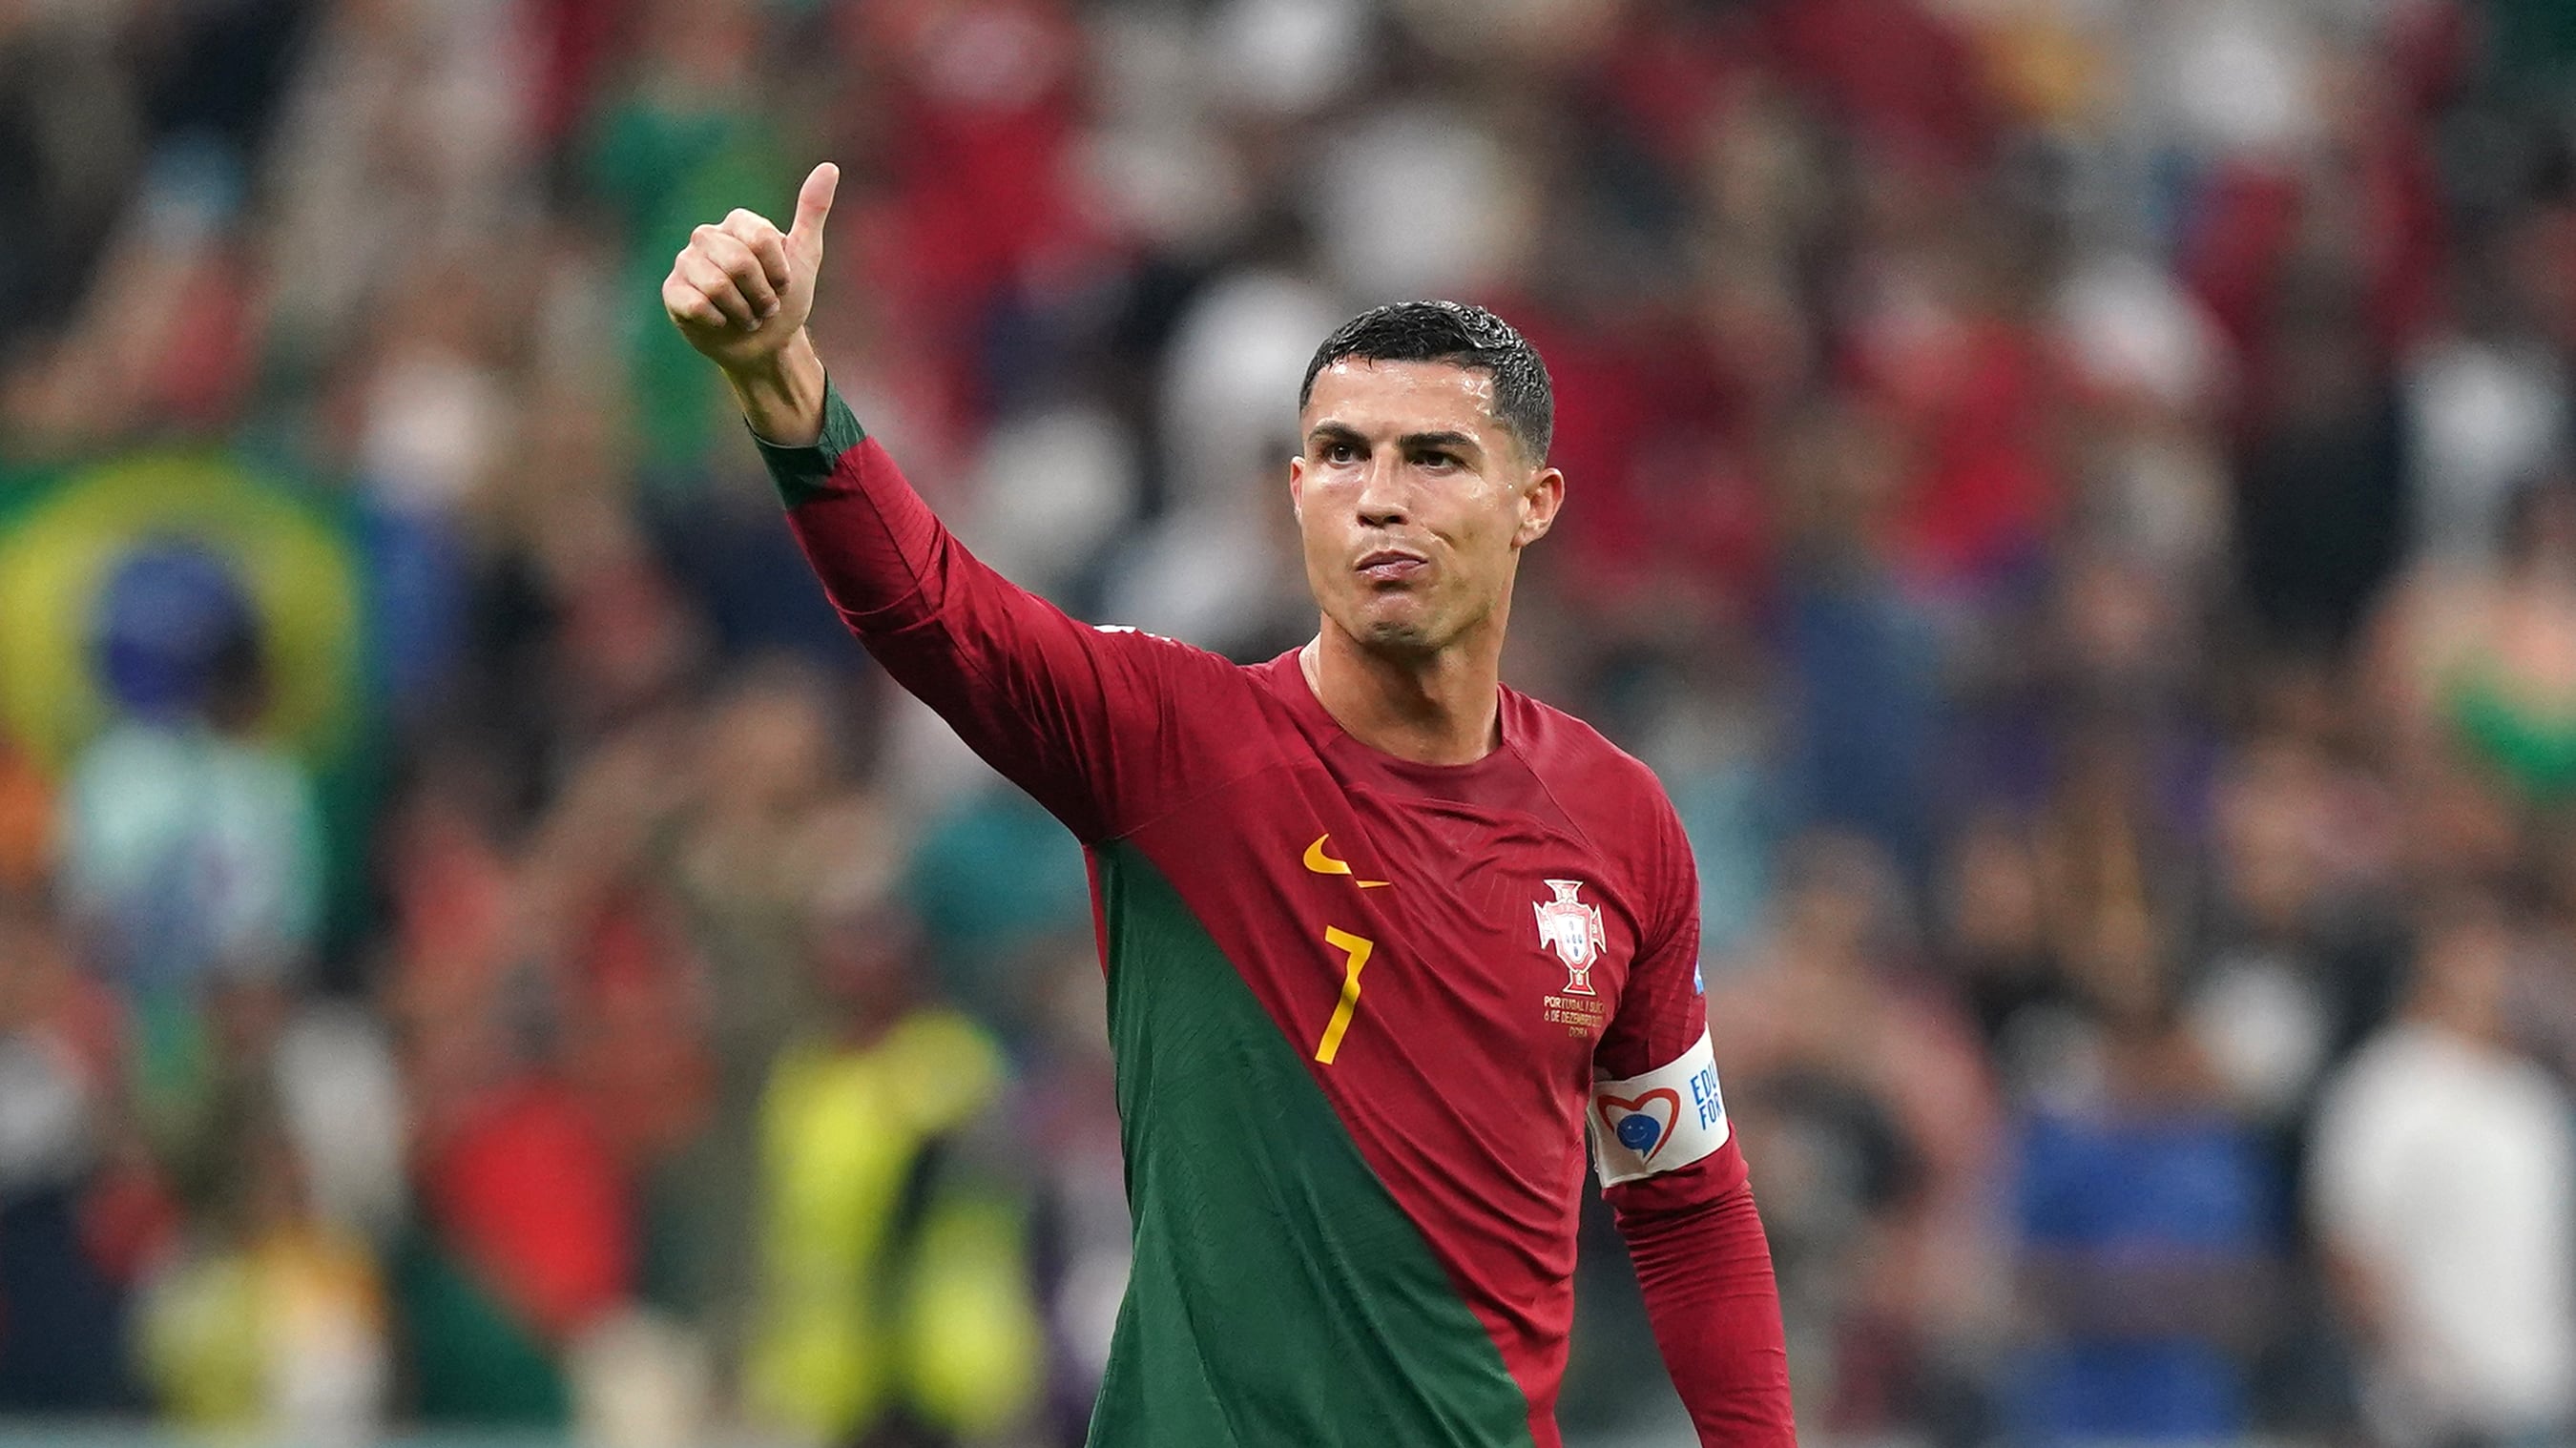 Cristiano Ronaldo will play at a record-extending sixth European Championship in Germany